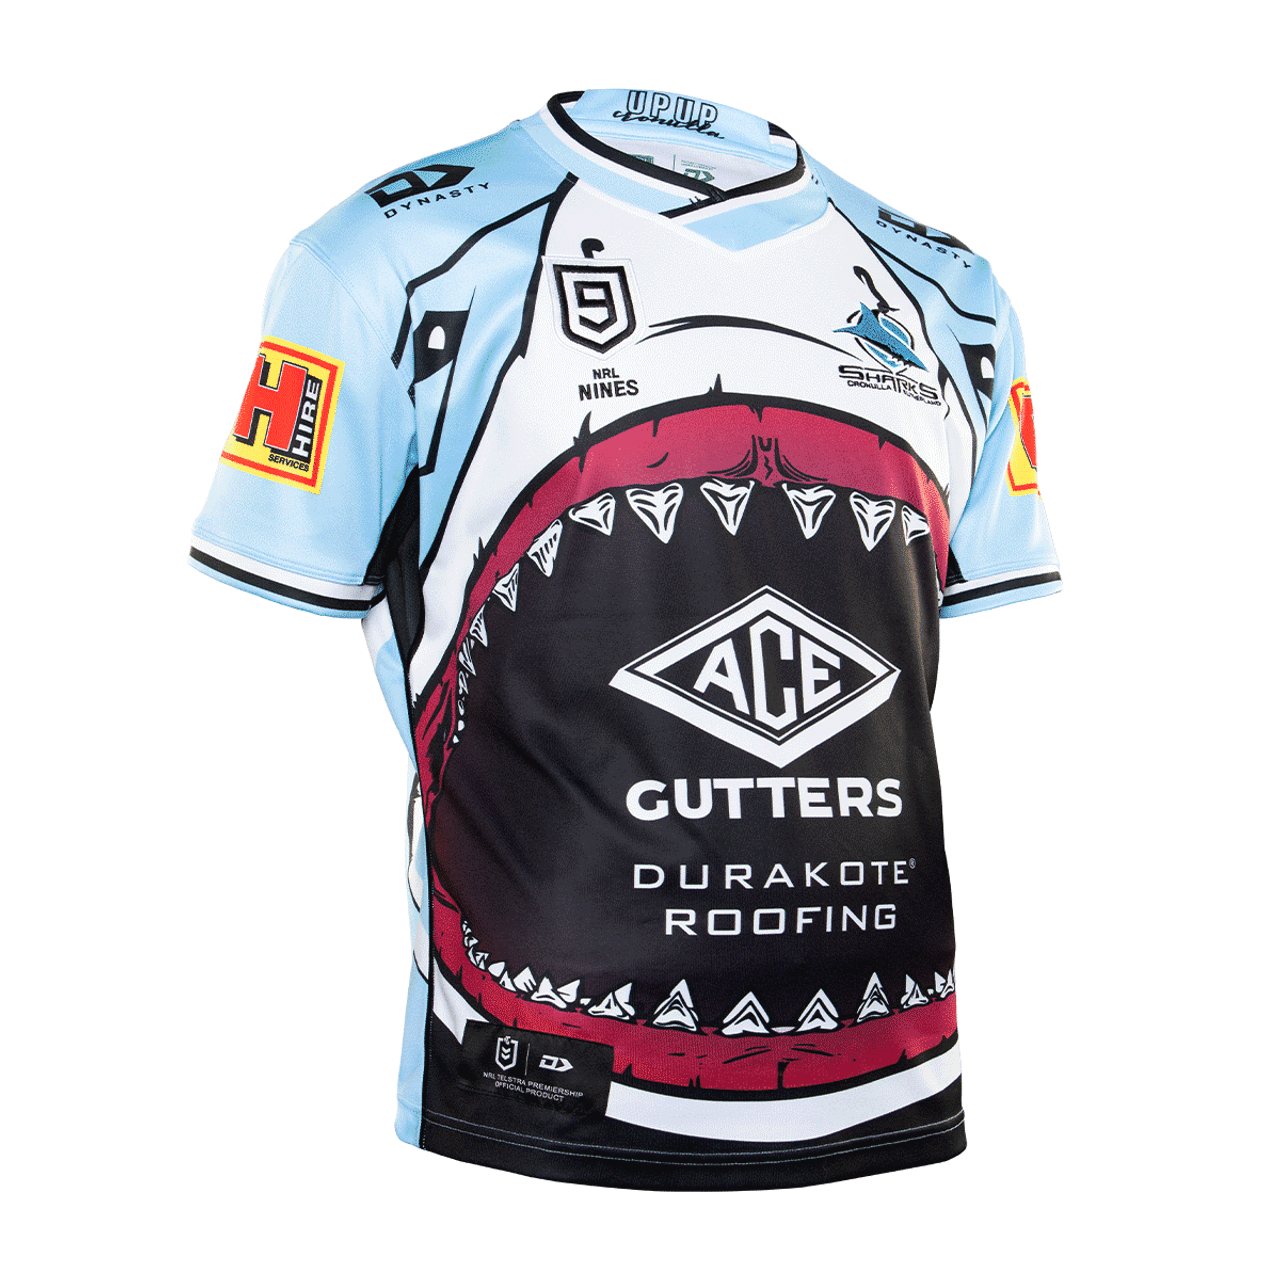 sharks heritage jersey for sale